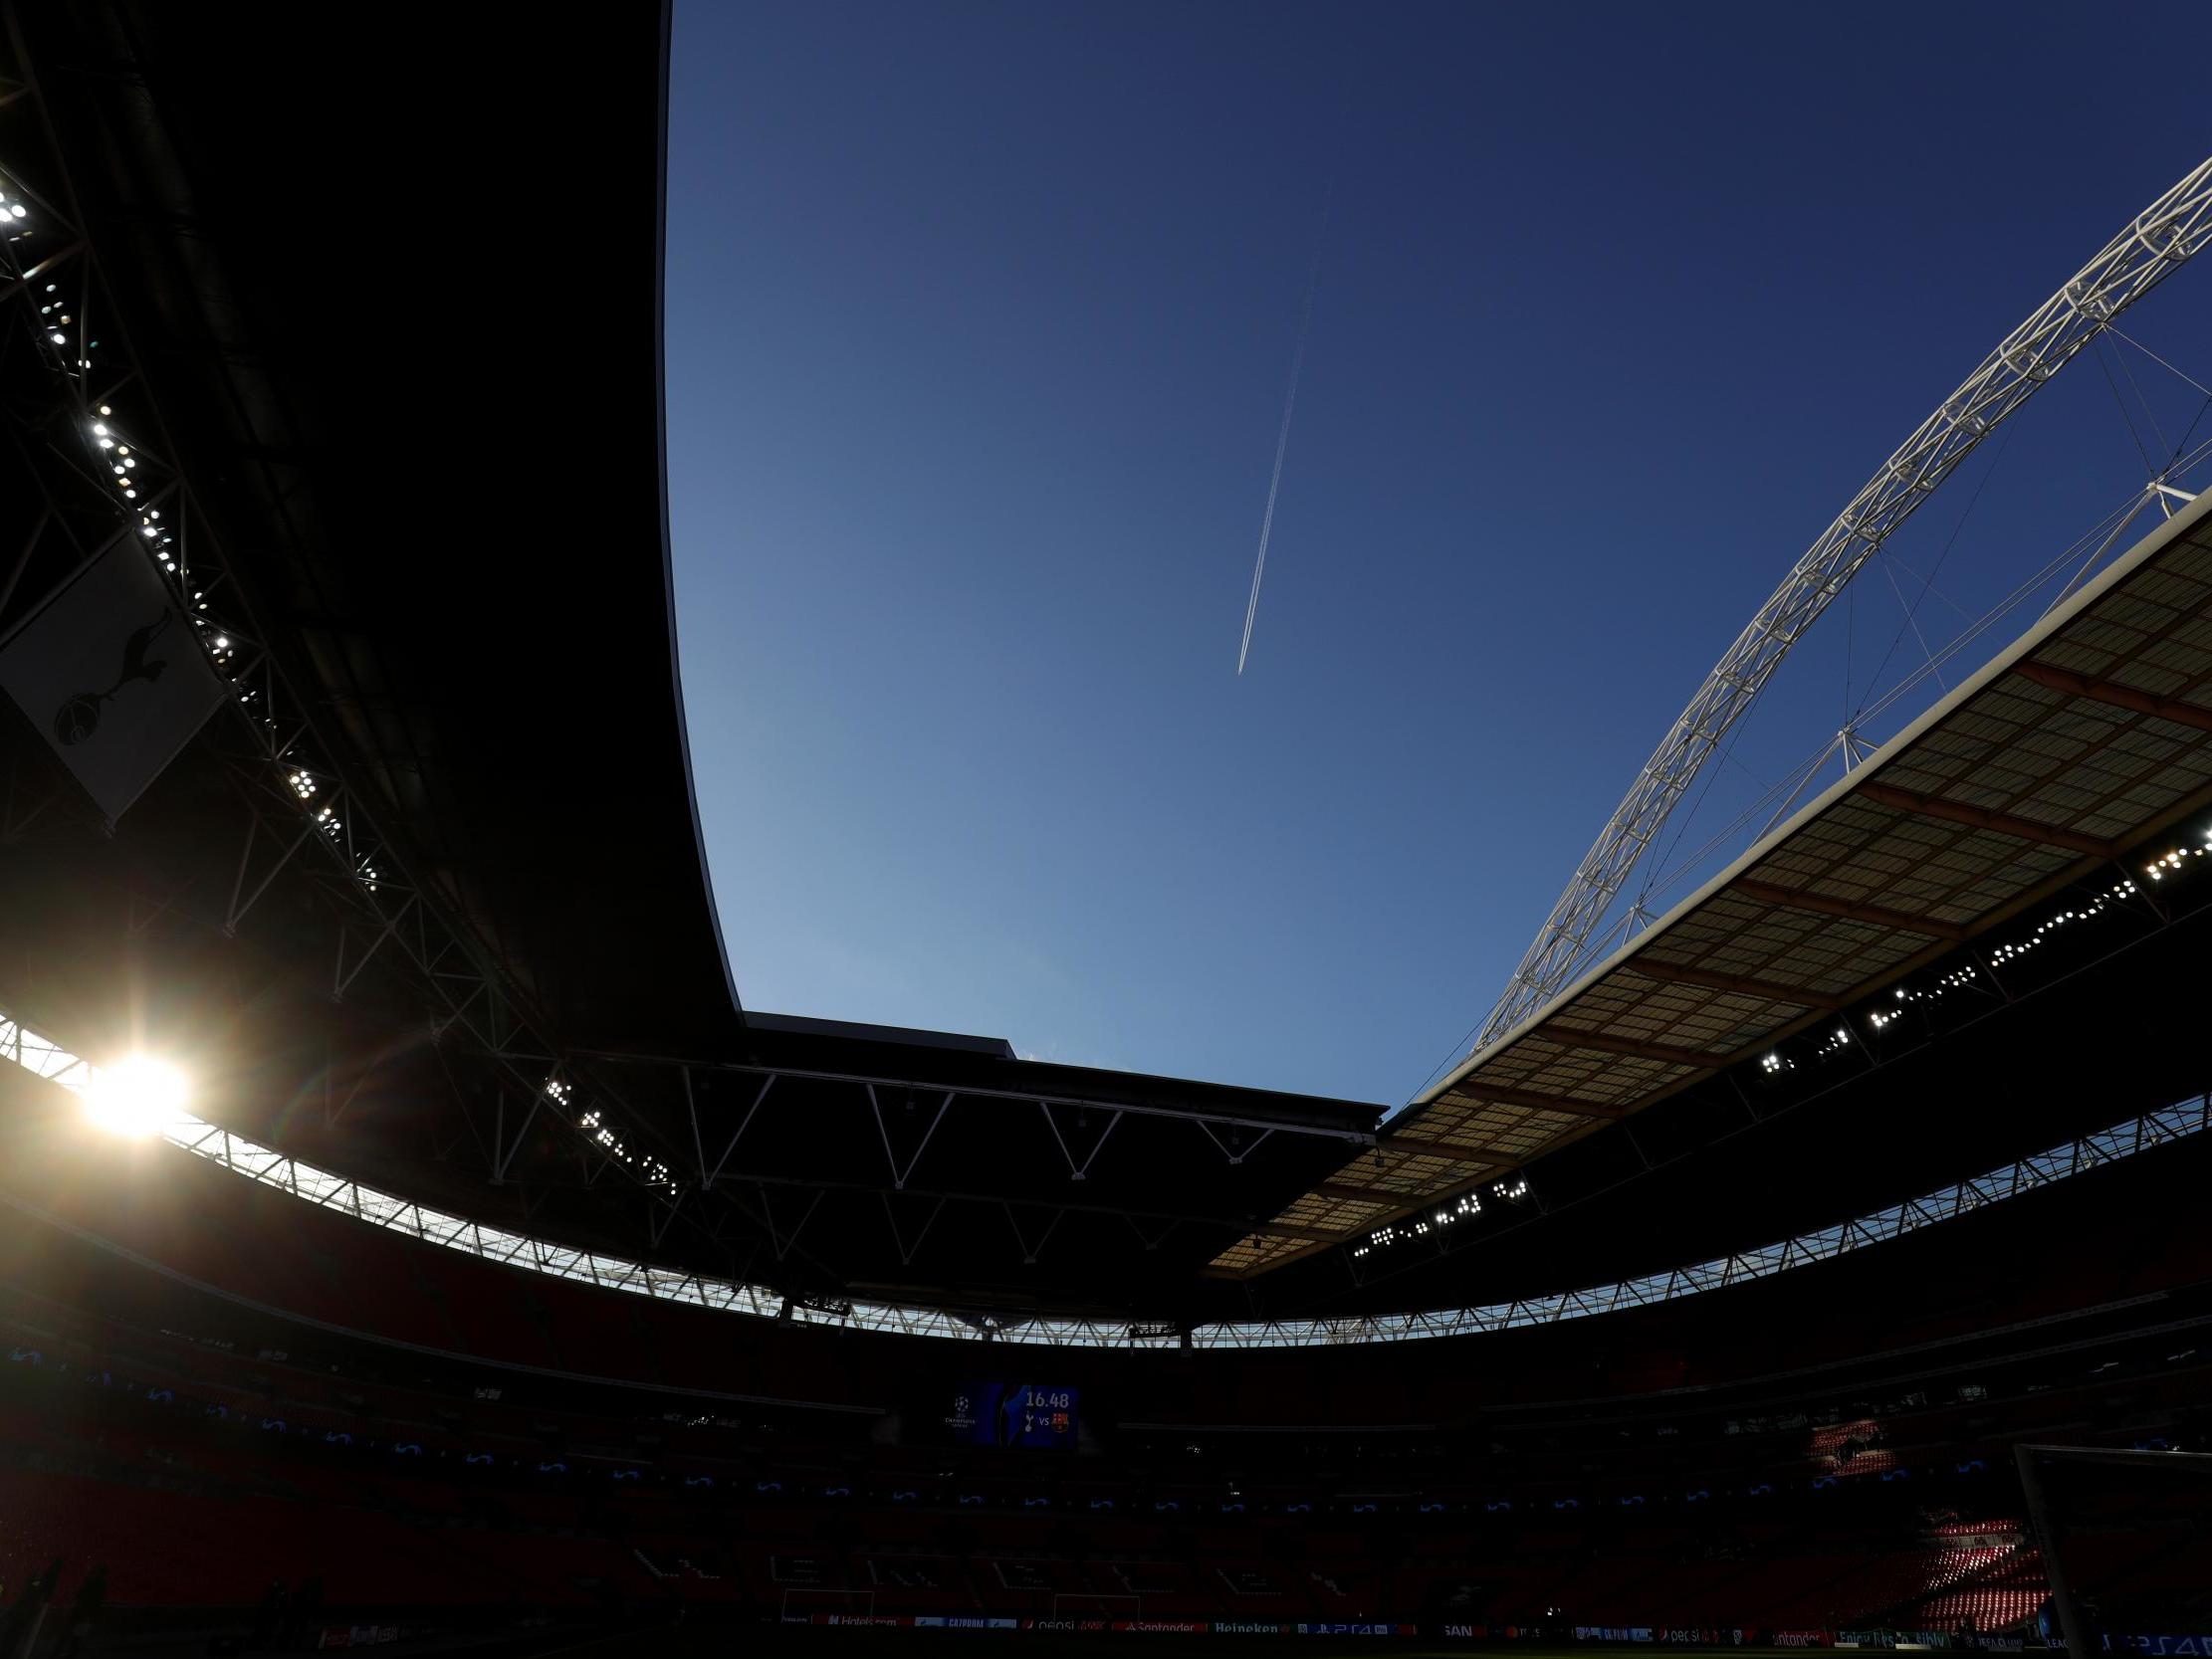 If this whole Wembley affair has achieved anything at all, then it is to draw a little fleeting, belated attention to the abject state of grassroots football in this country